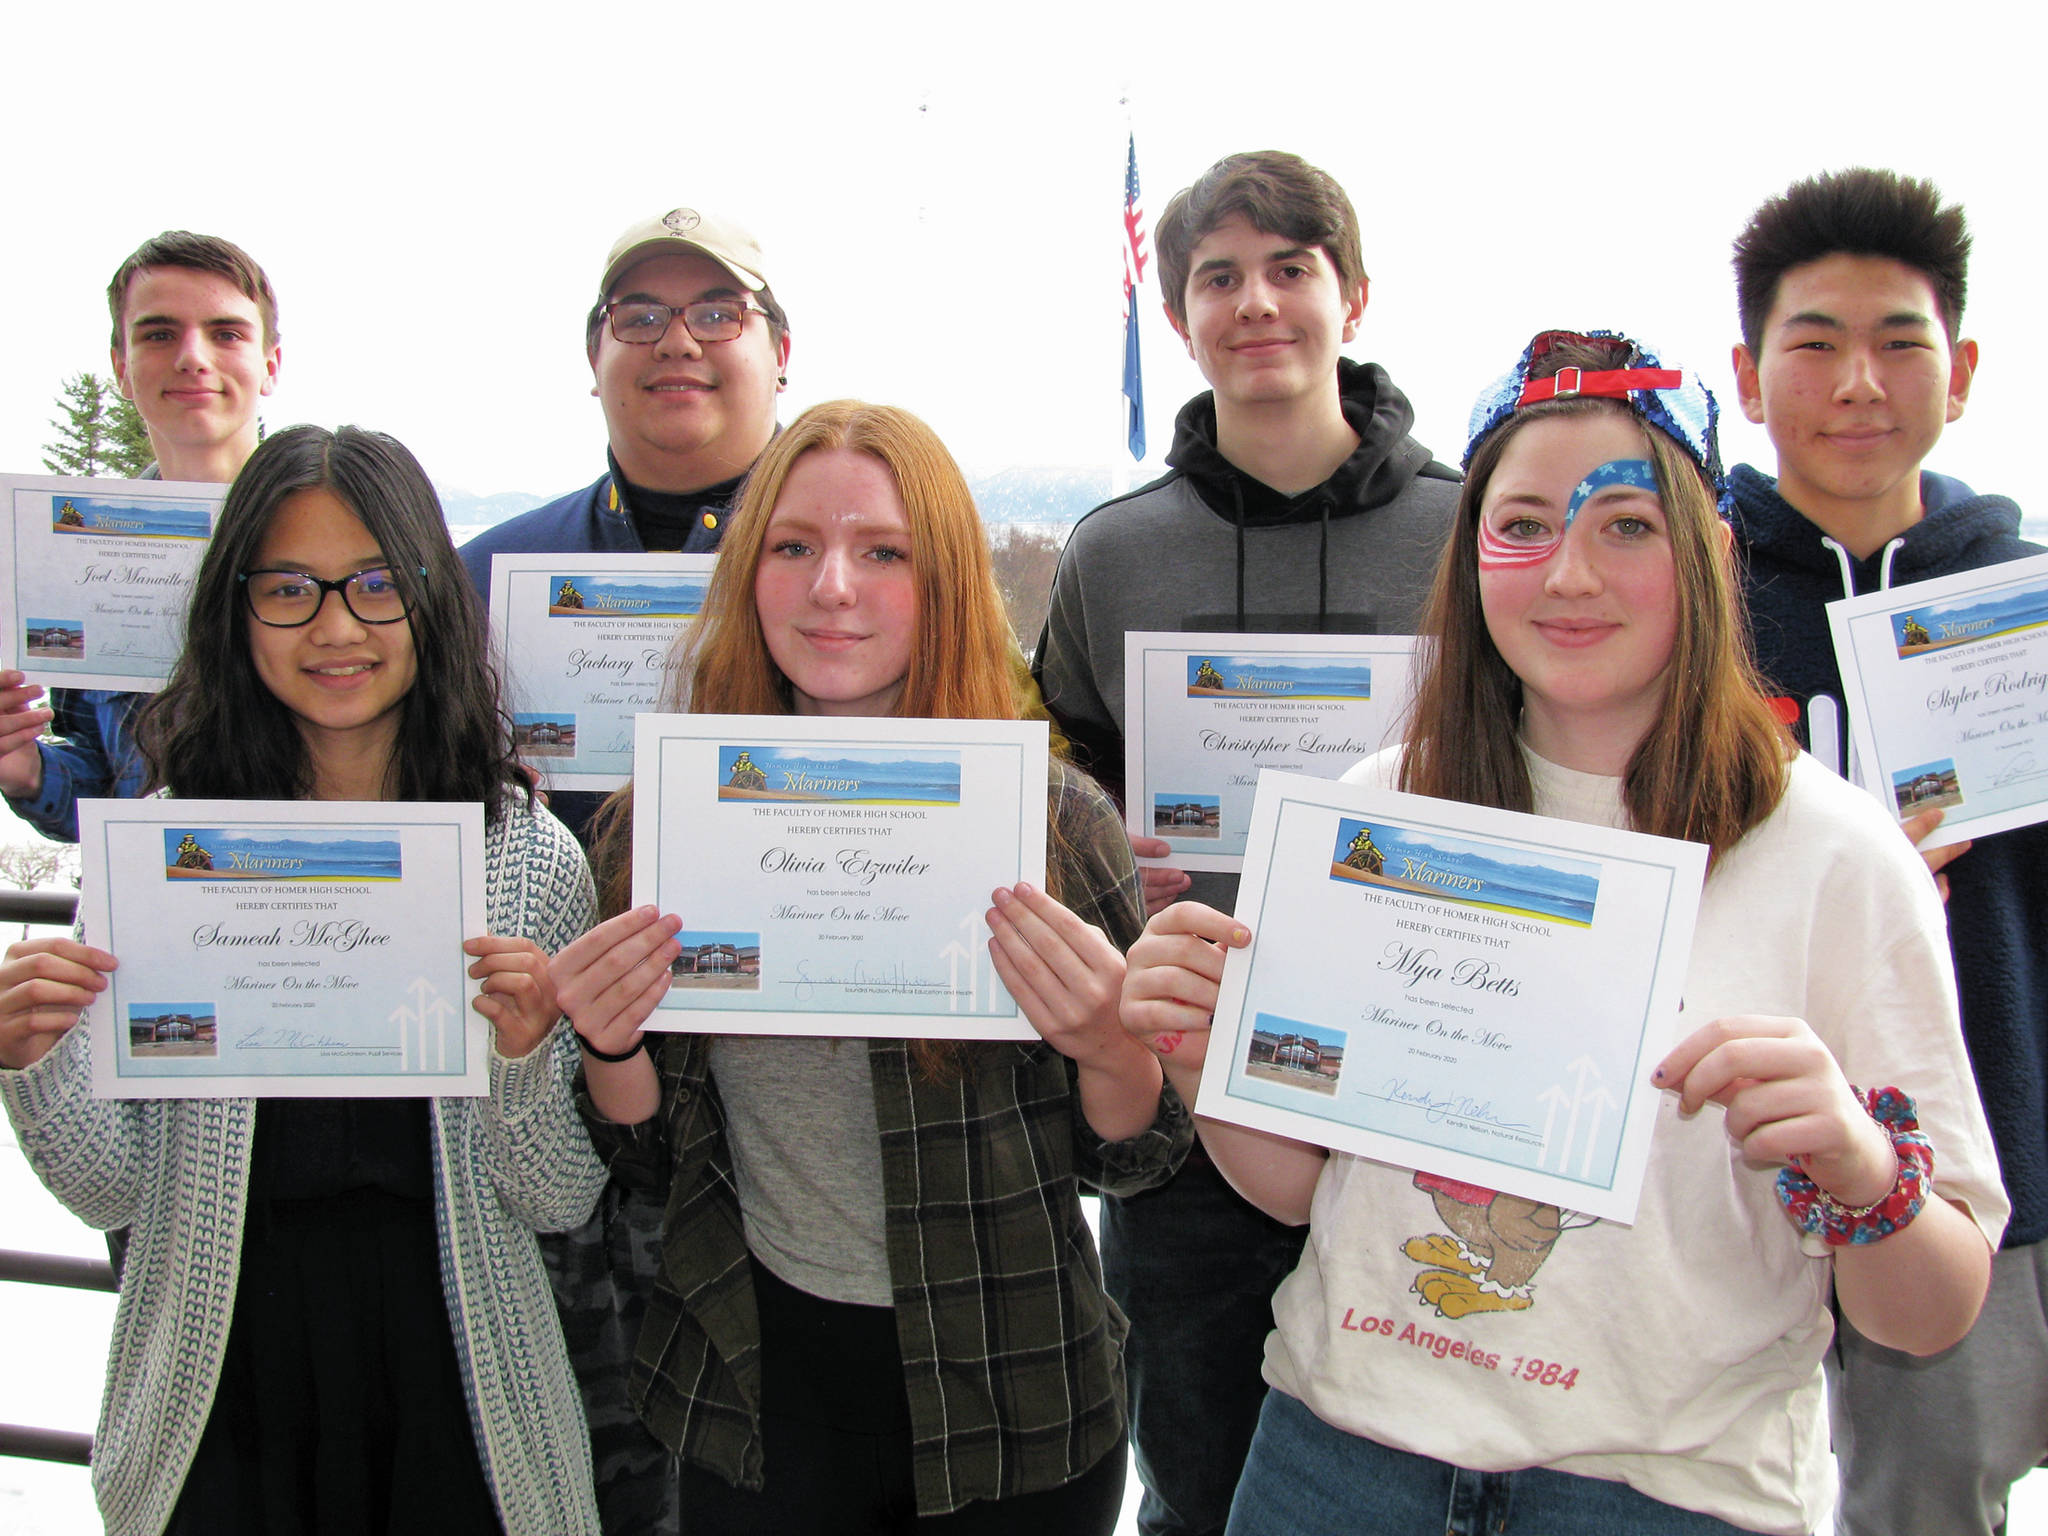 From left to right: Homer High School students Joel Manwiller, Sameah McGhee, Zach Condon, Olivia Etzwiler, Chris Landess, Mya Betts and Skyler Rodirguez hold their Mariners on the Move awards in this undated photo at Homer High School in Homer, Alaska. Not pictured: Lilly Smith. (Photo courtesy Paul Story)